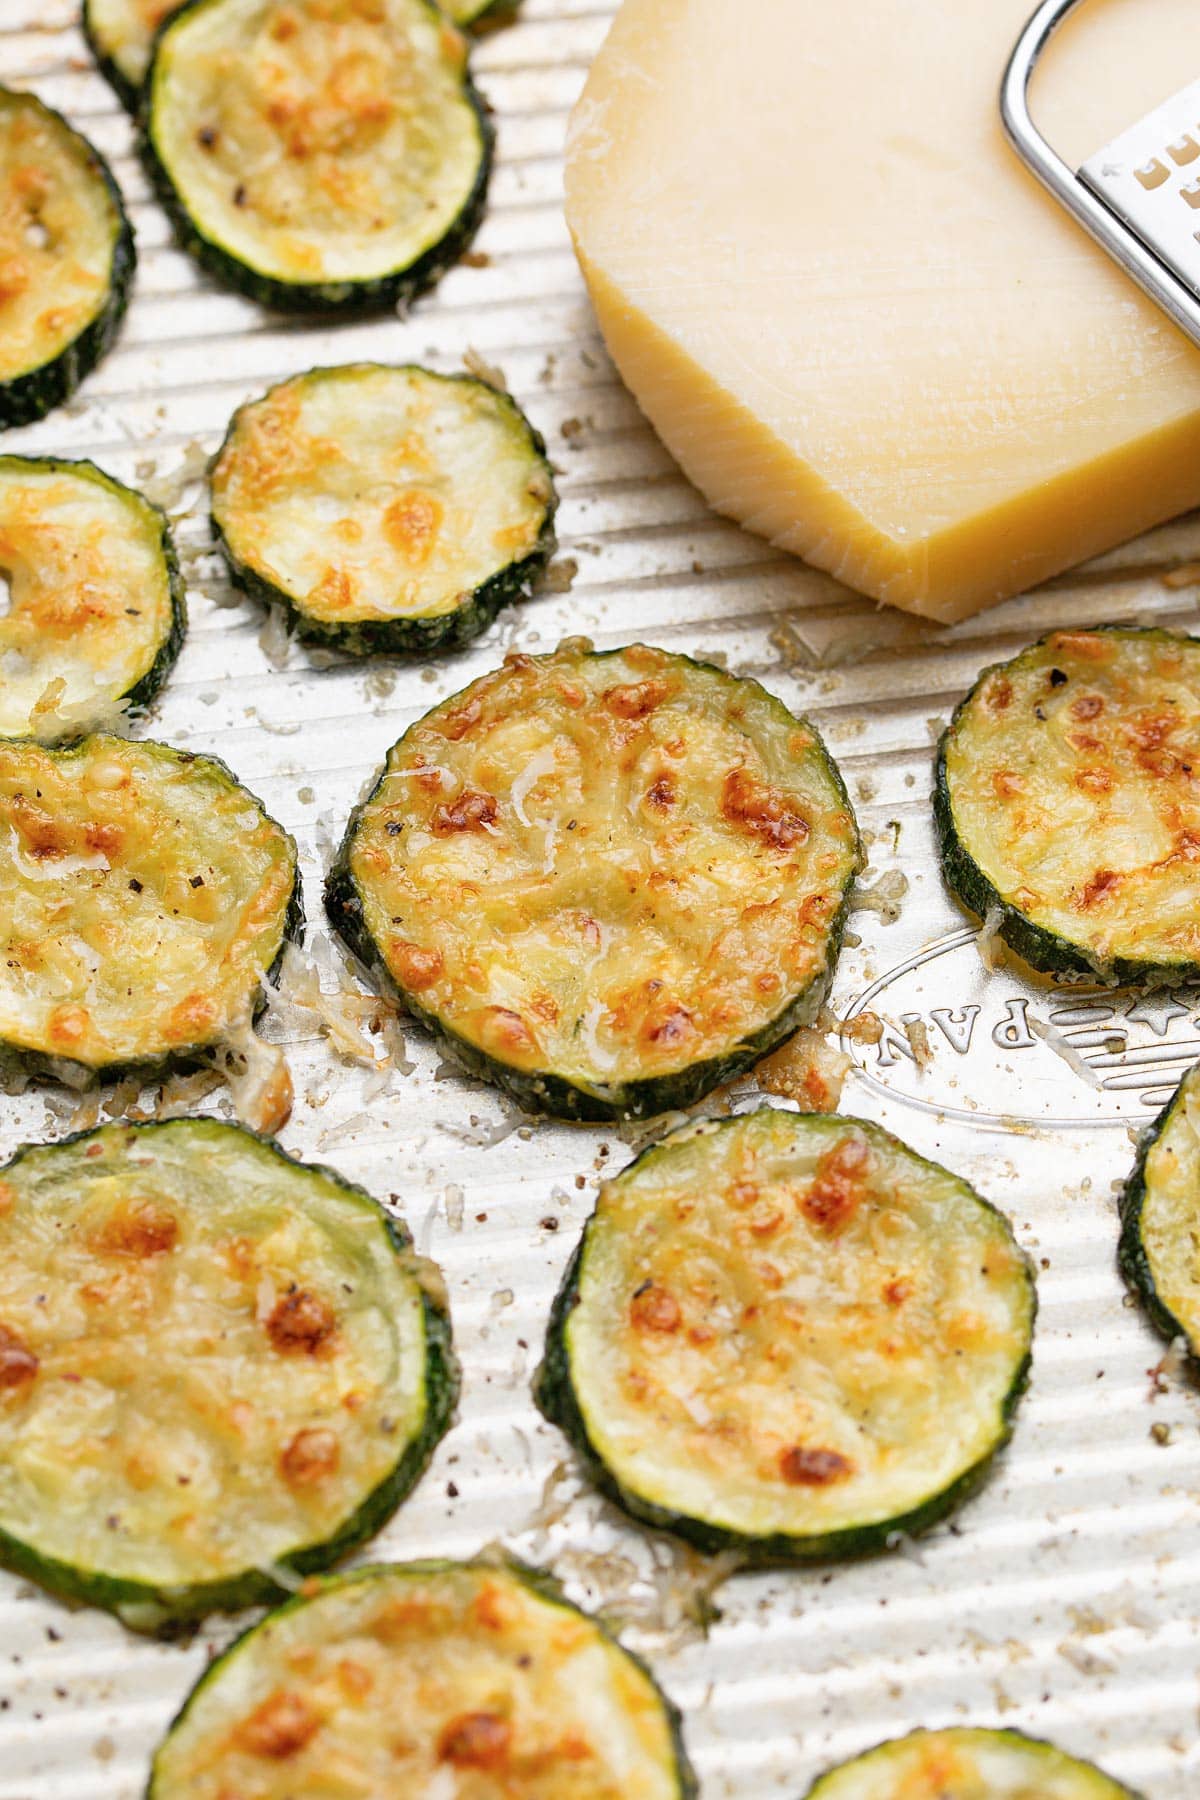 Roasted Parmesan zucchini arranged in a single layer on a ribbed baking sheet.